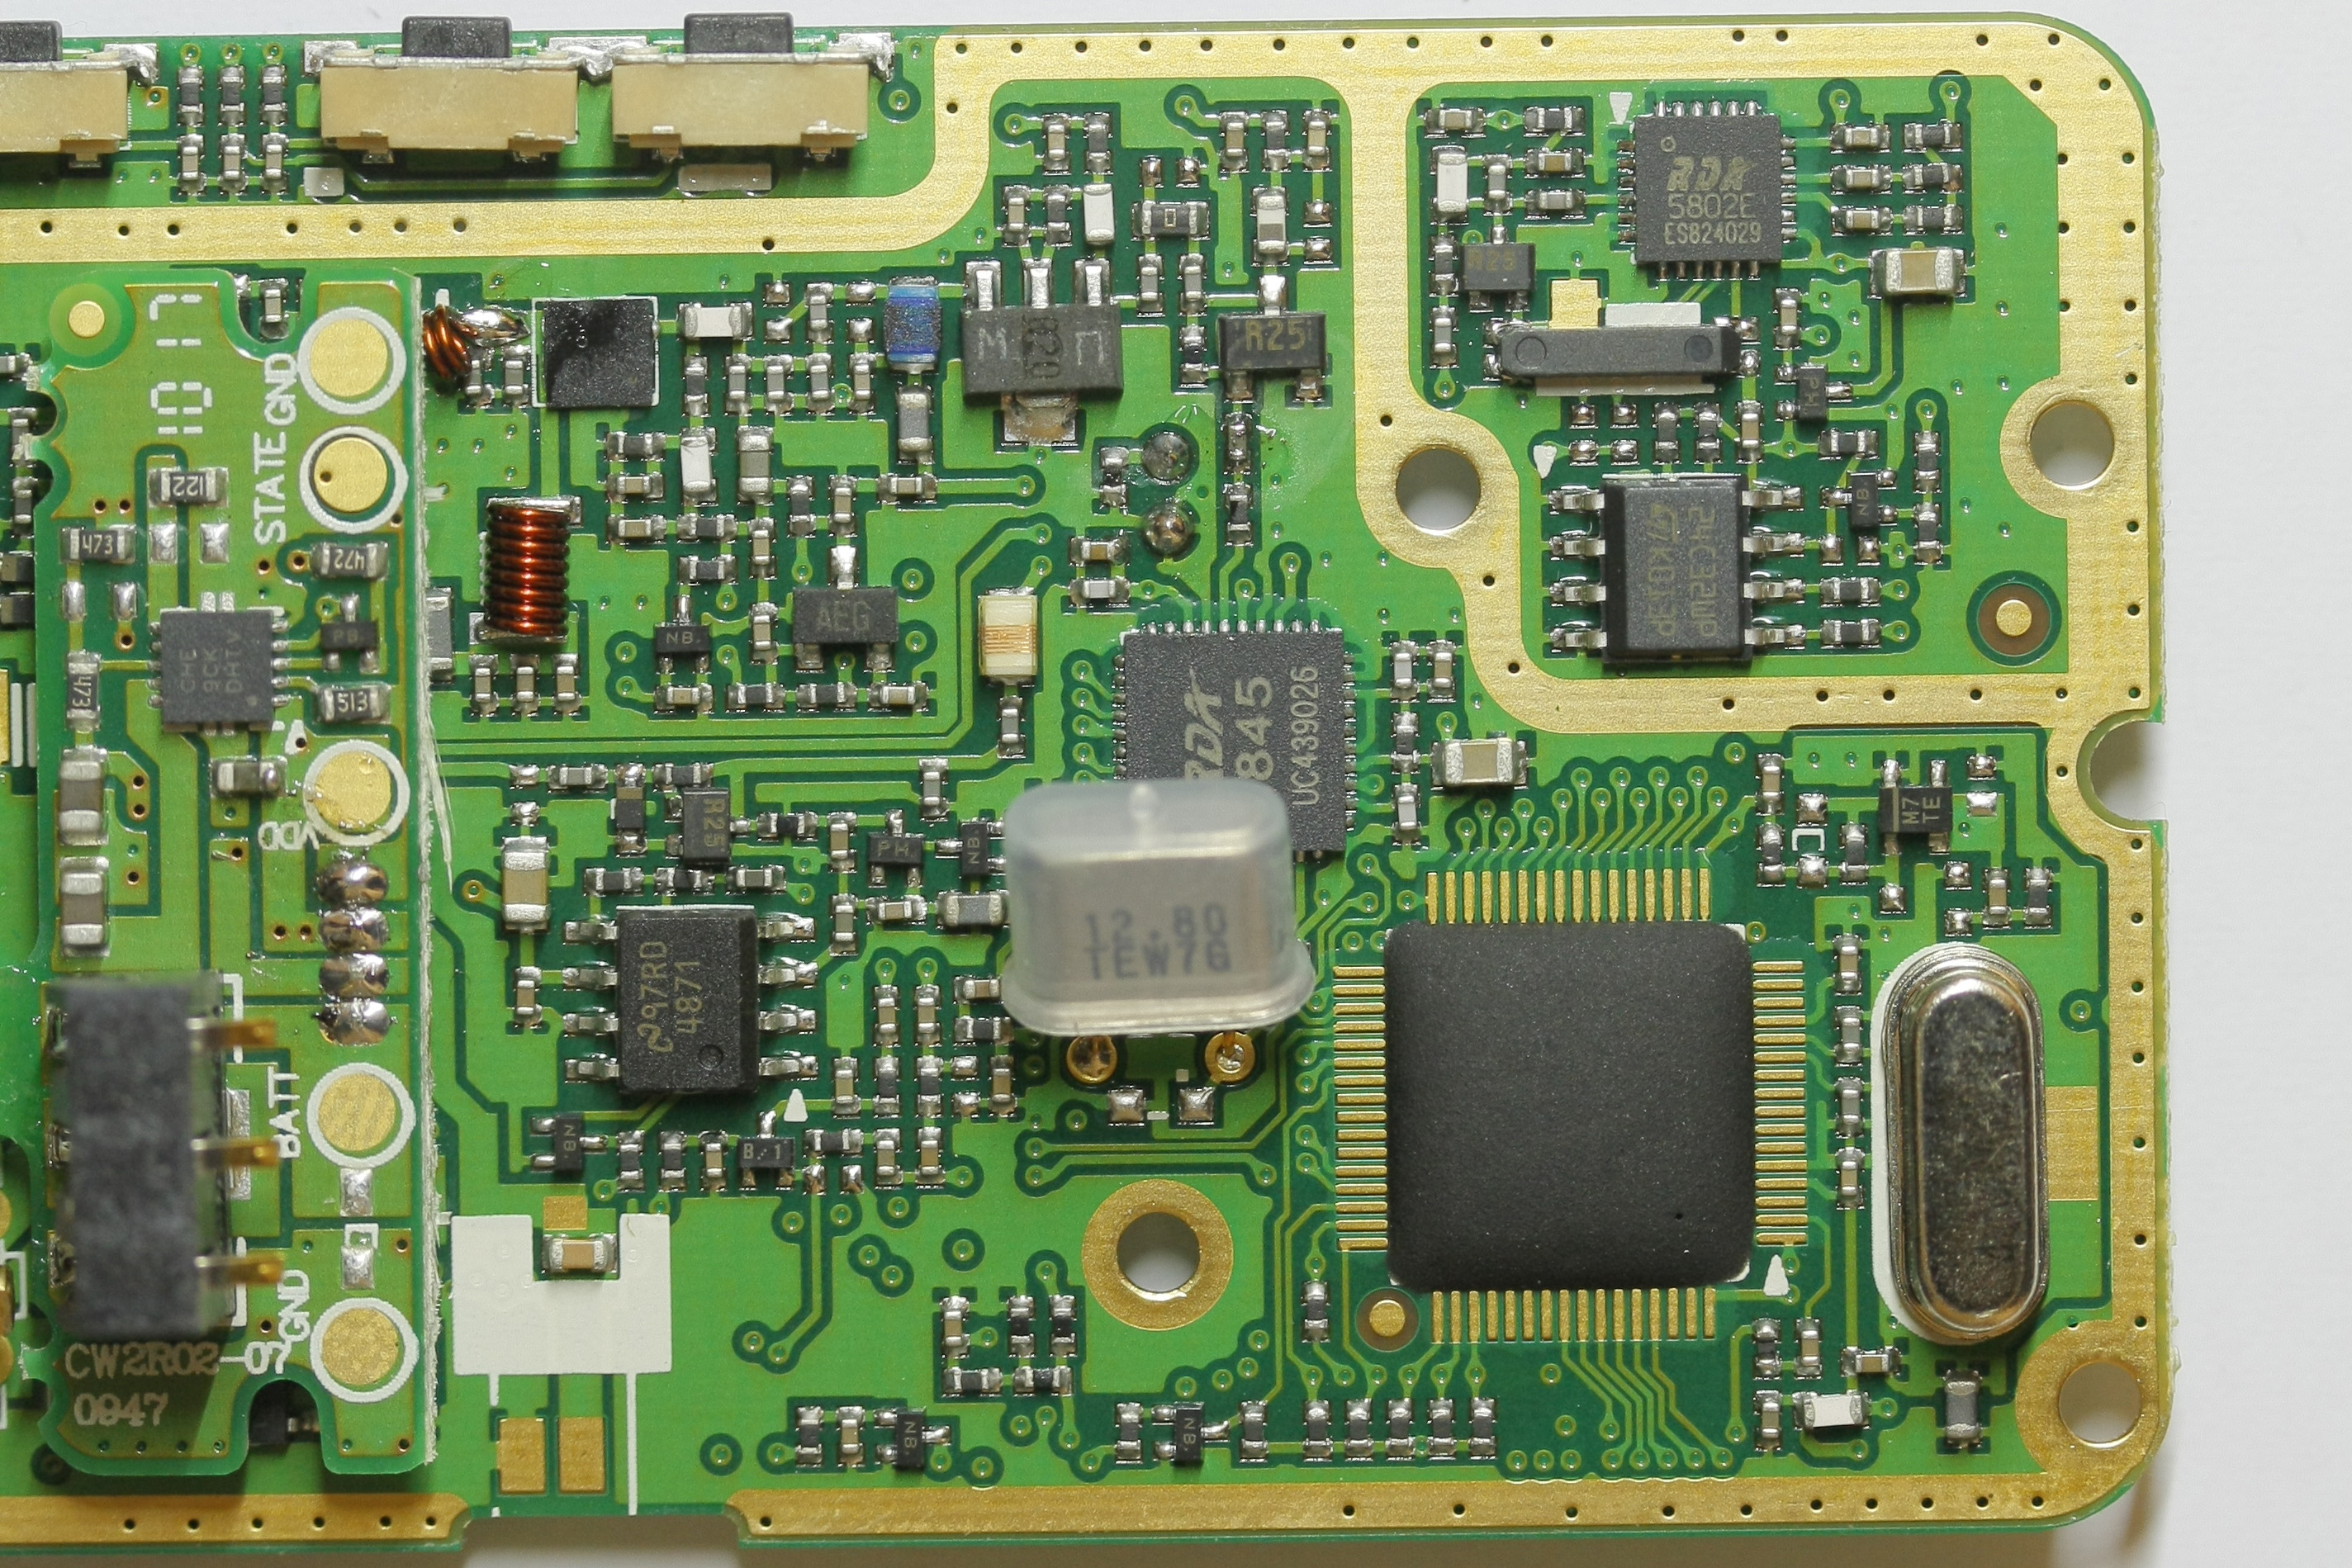 Lower section of main PCB